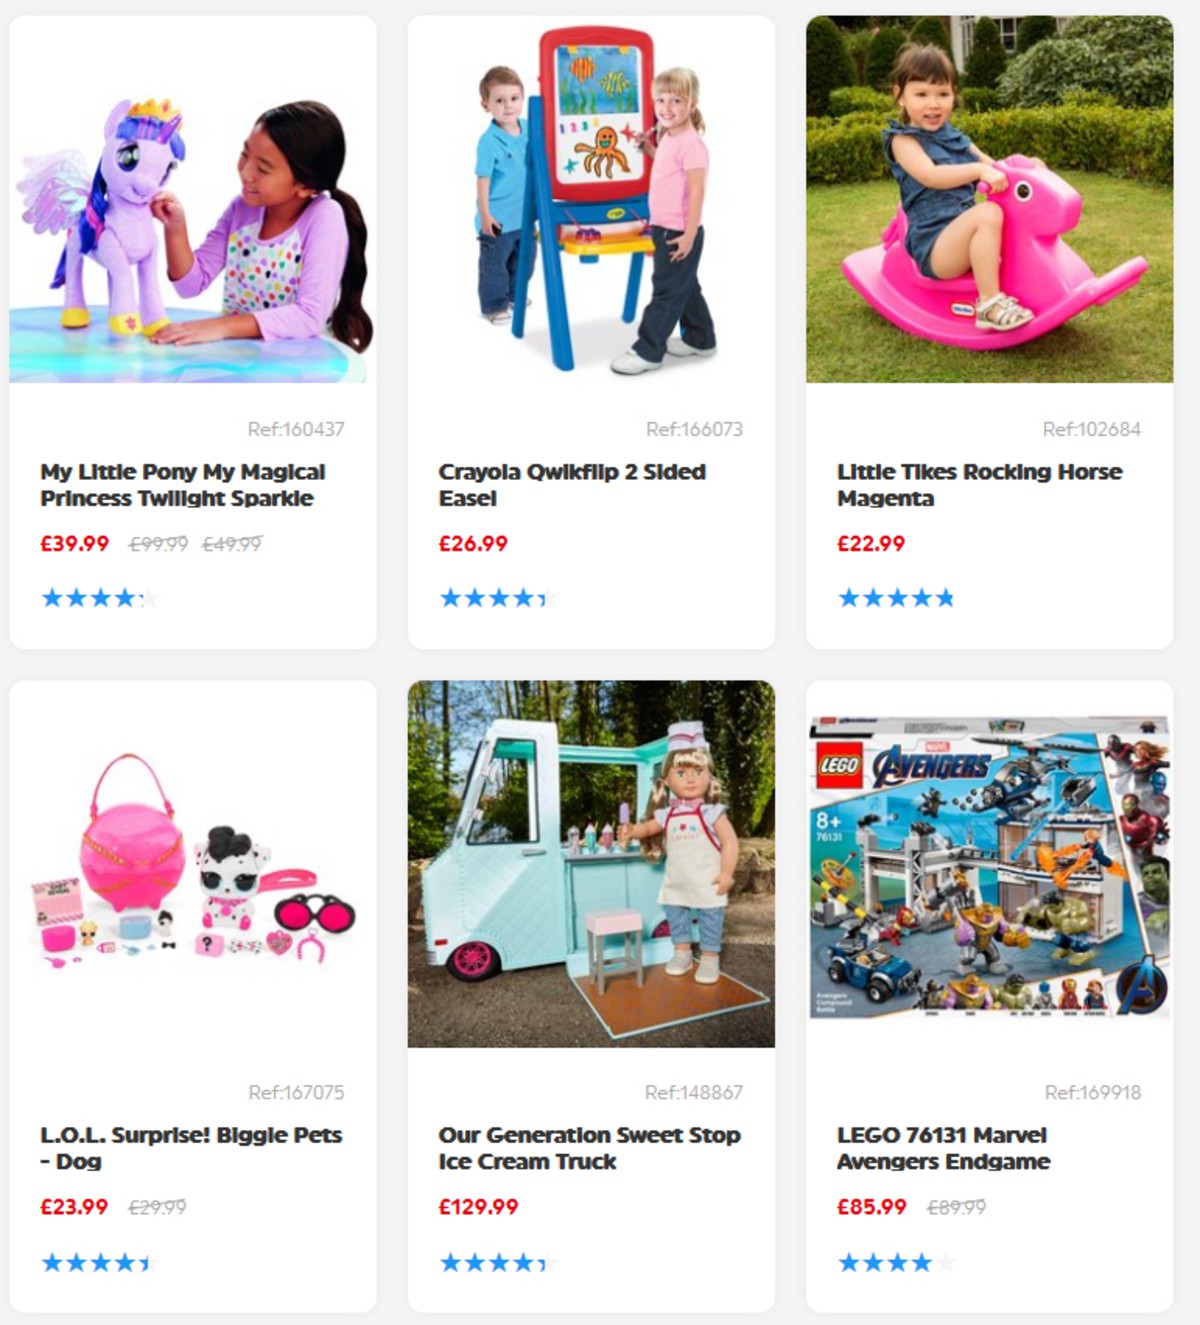 Smyths Toys Offers from 27 April